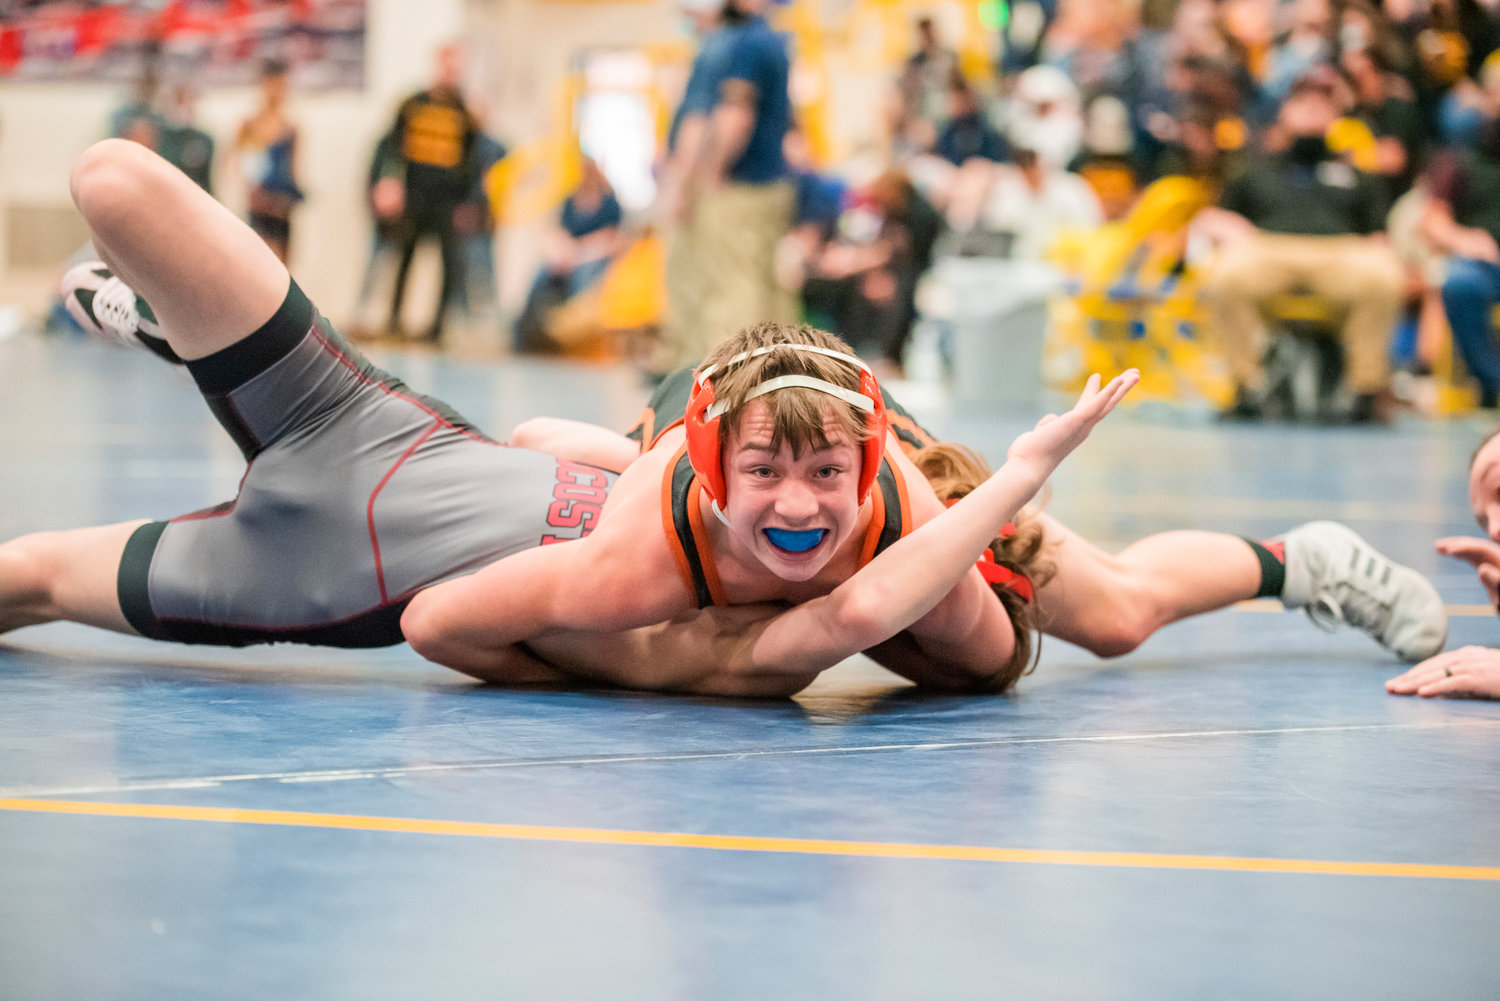 Rainier’s Conner Mounts looks to the camera as he pins his opponent during a wrestling match at Adna High School.